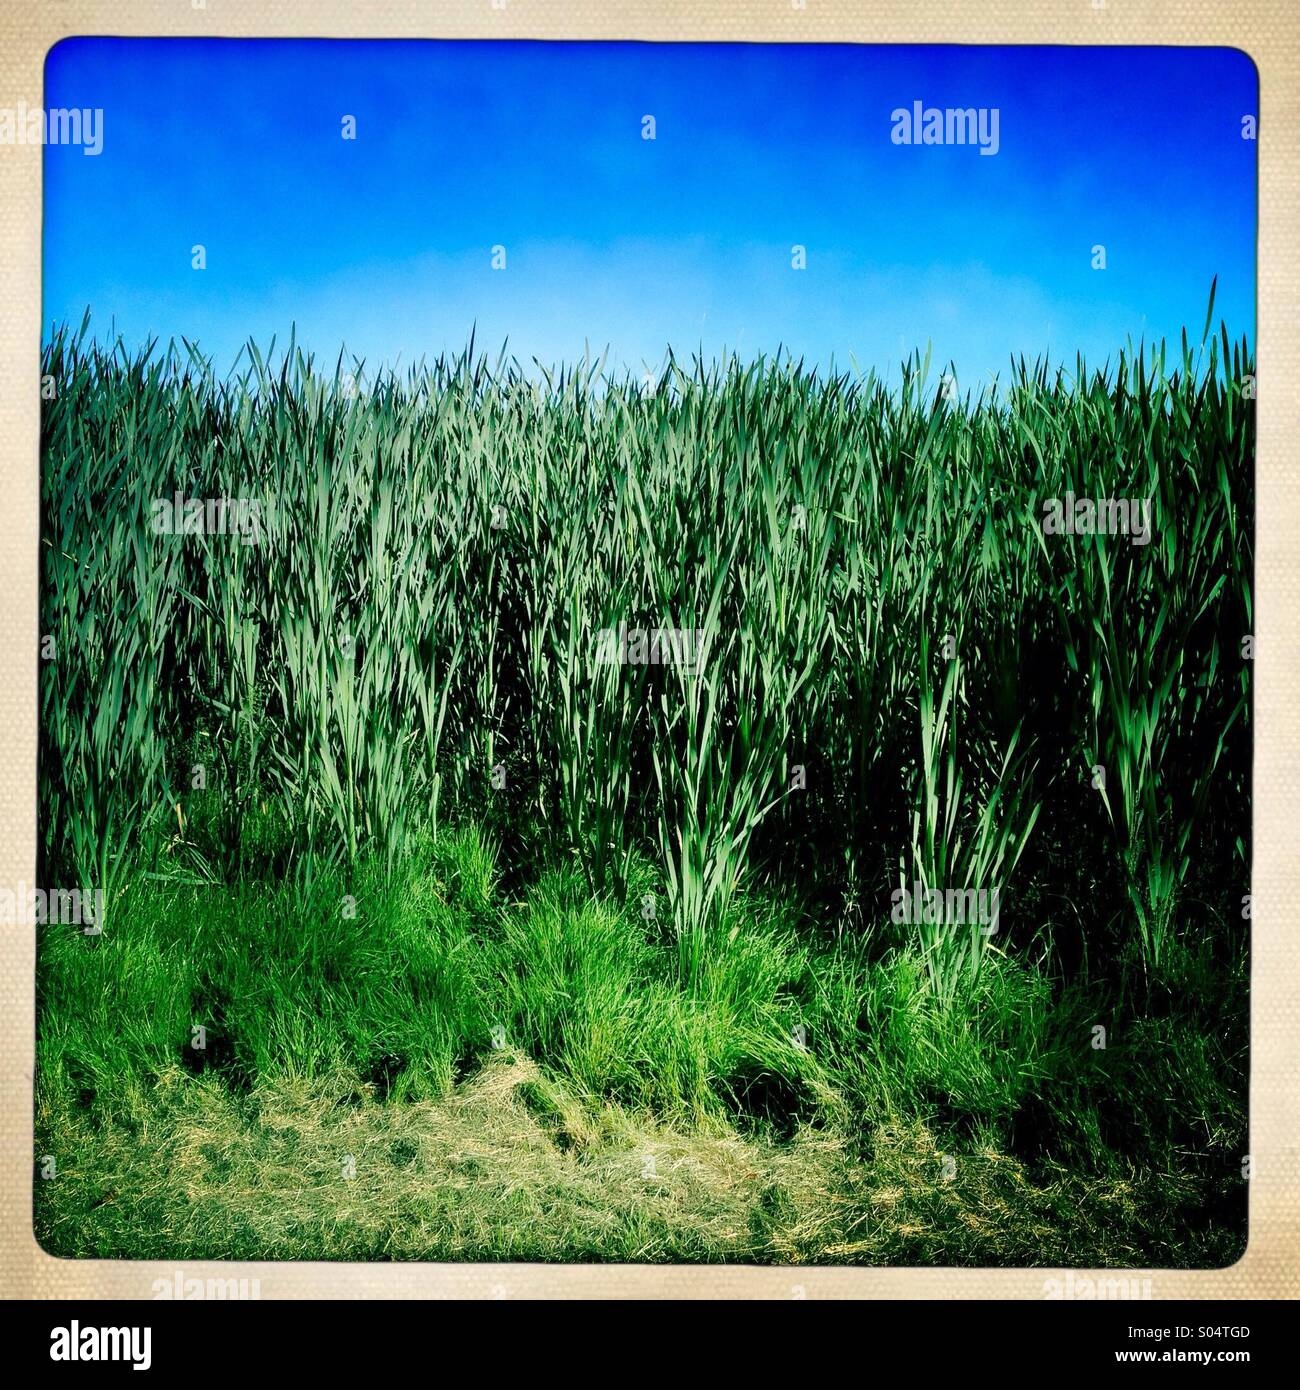 Hipstamatic photo with white borders. Graphic image, photo of bullrushes with long grass in foreground. Stock Photo